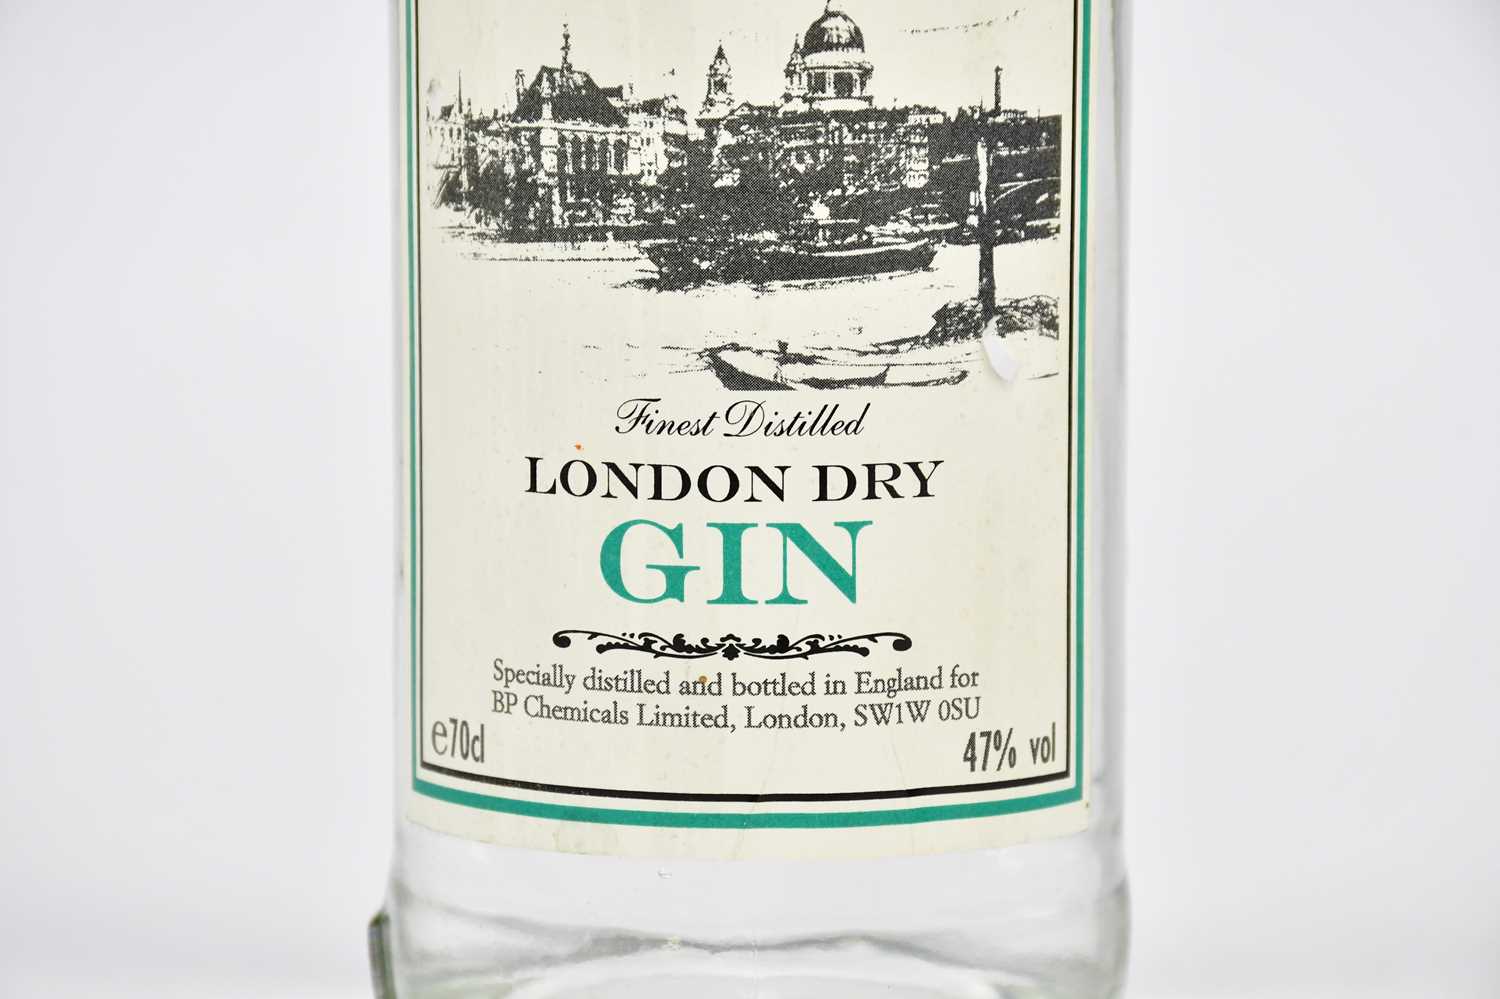 GIN; a bottle of London Dry Gin, ‘Specially distilled and bottled in England for BP Chemicals - Image 3 of 3